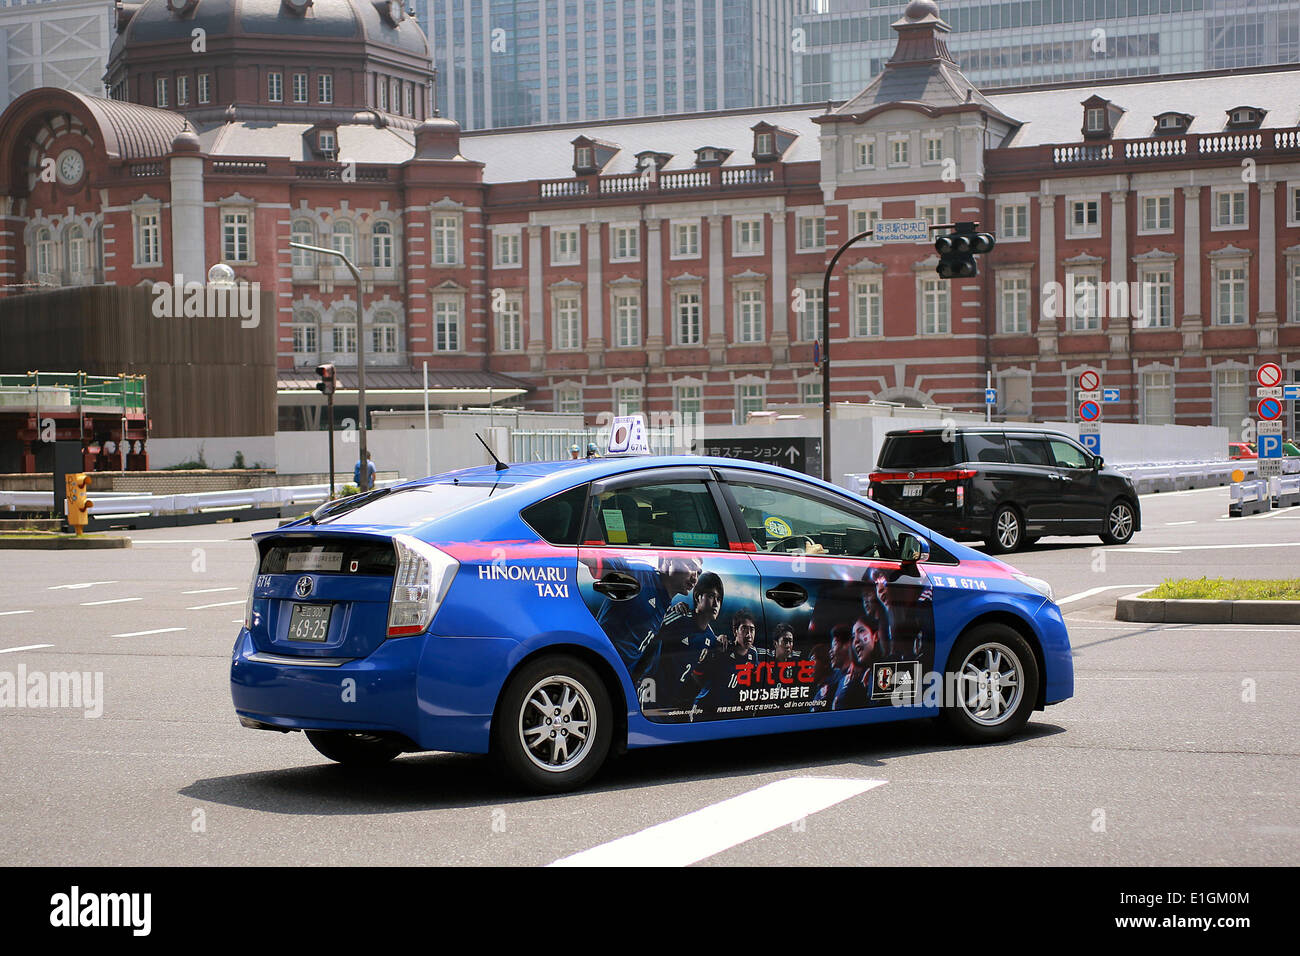 Tokyo, Japan – The 'Adidas Hinomaru-taxi' promotes the Japanese National Soccer Team a week before to start the 2014 FIFA World Cup Brazil on June 4, 2014. According to the official web site of the company Hinomaru-taxi customers can see inside the car the signs of the soccer players Shinji Kagawa, Sakai, Hiroshi Kiyotake and Uchida. © Rodrigo Reyes Marin/AFLO/Alamy Live News Stock Photo